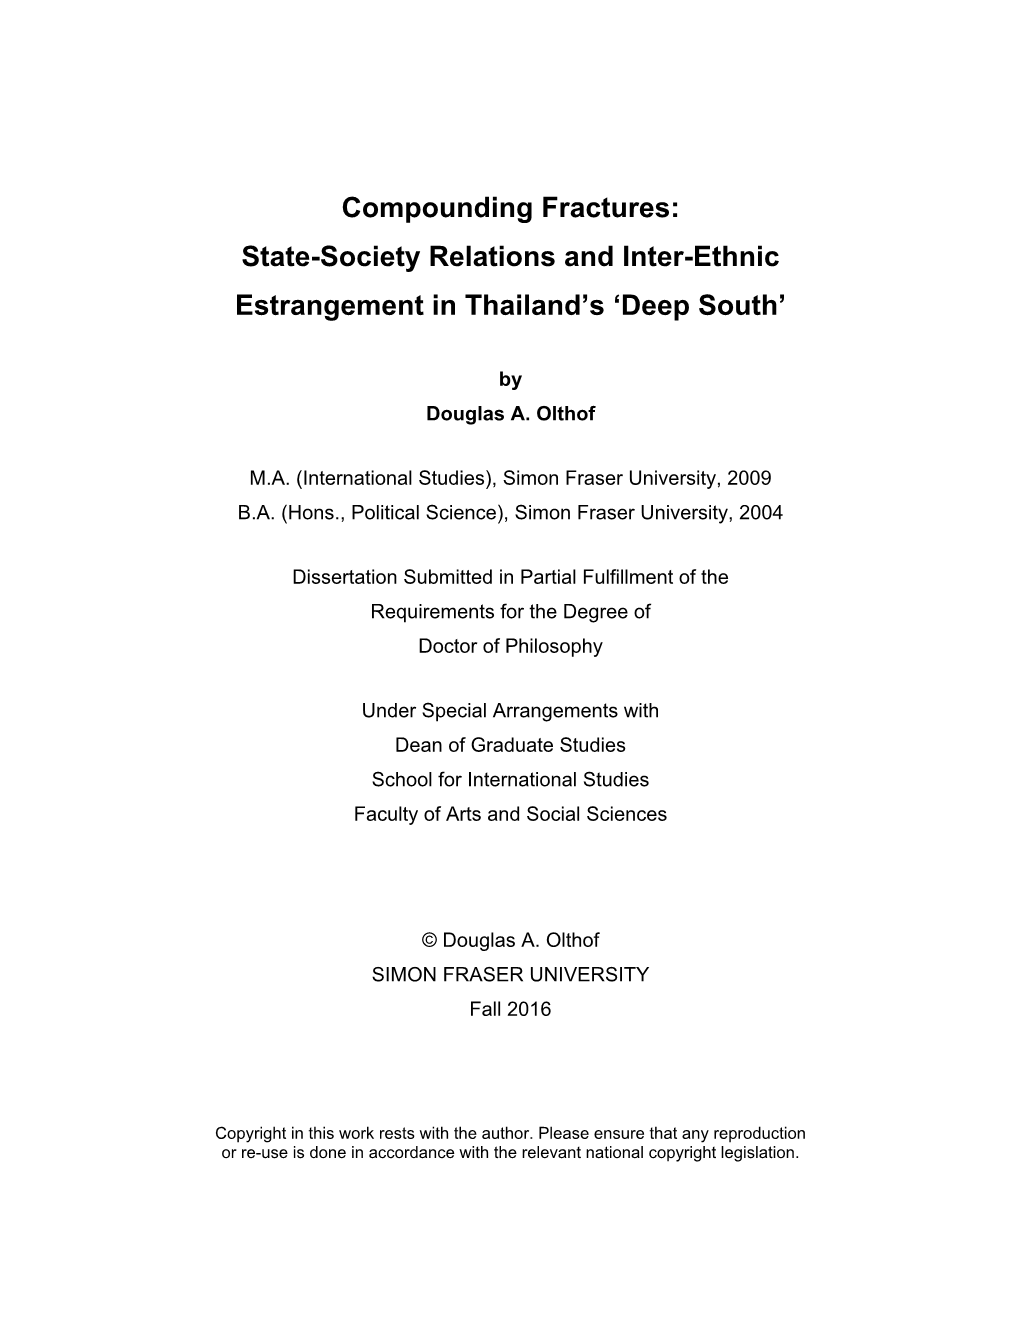 State-Society Relations and Inter-Ethnic Estrangement in Thailand's